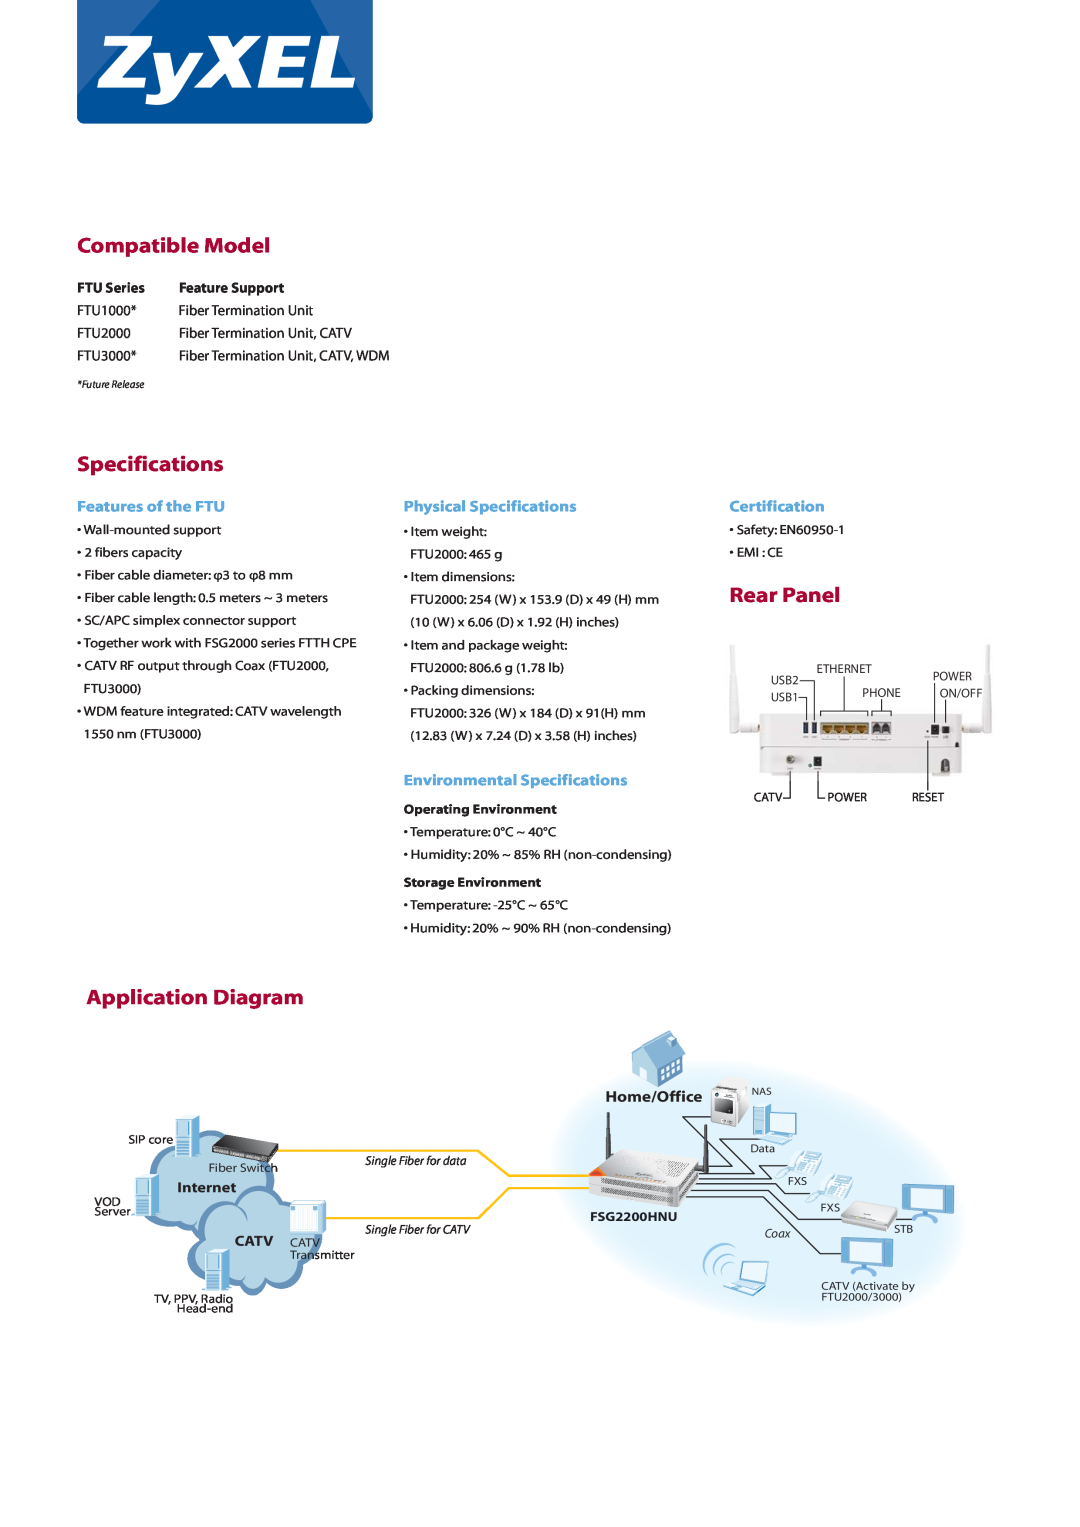 ZyXEL Communications FSG2200HNU Compatible Model, Rear Panel, Application Diagram, Features of the FTU, Specifications 